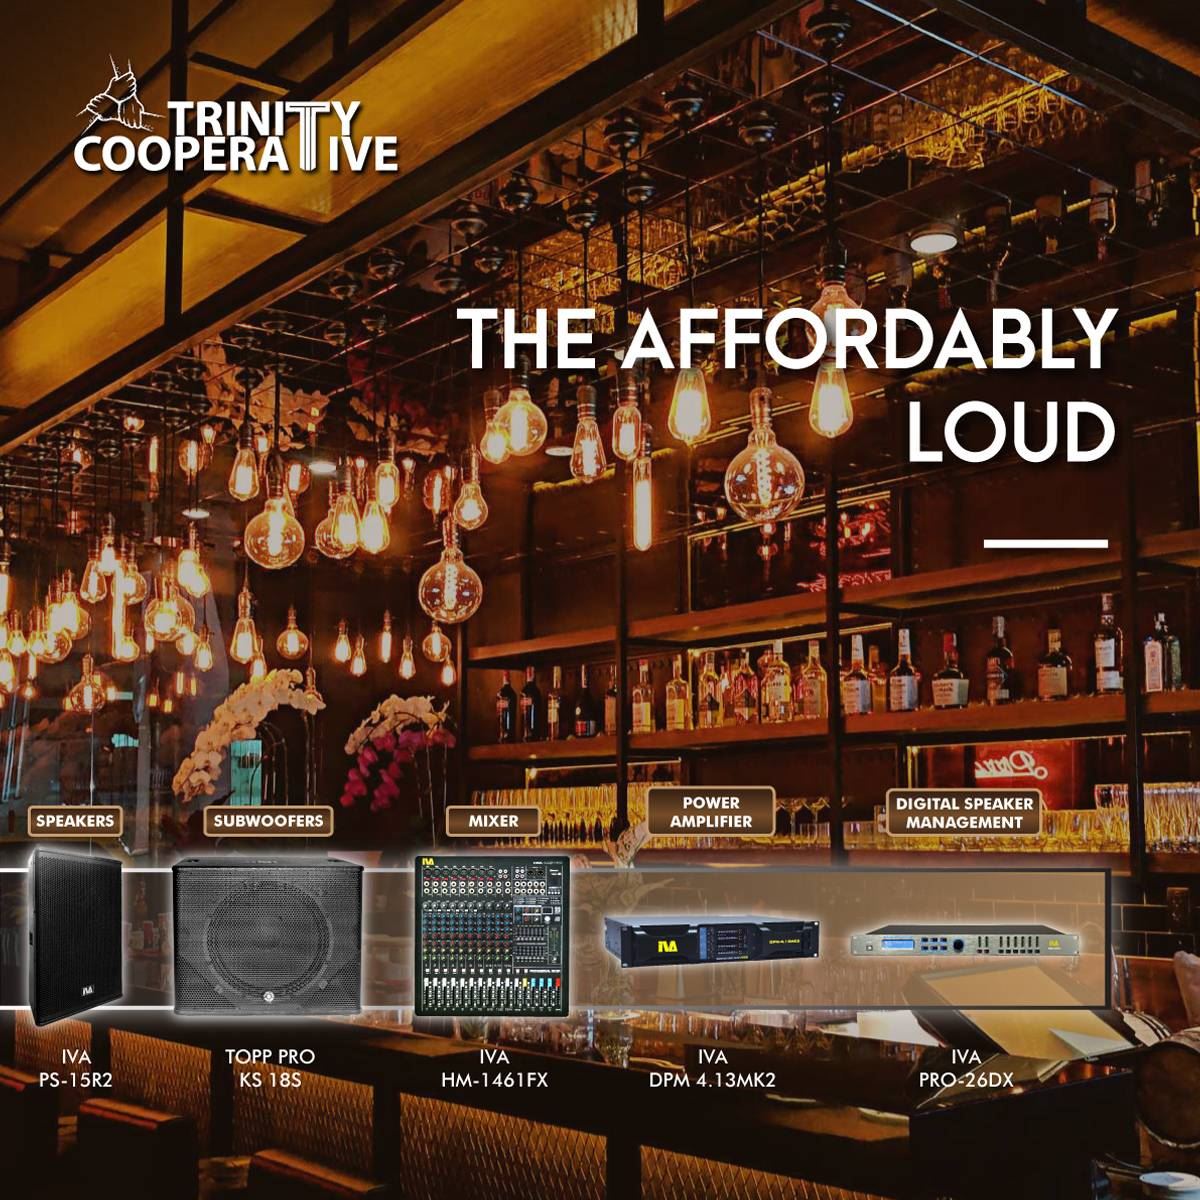 the-affordably-loud-pa-sound-system-for-bar-pub-club-bistro-iva-ps-15r2-hm-1461fx-pro-26dx-dpm-413mk2-topp-pro-ks-18s